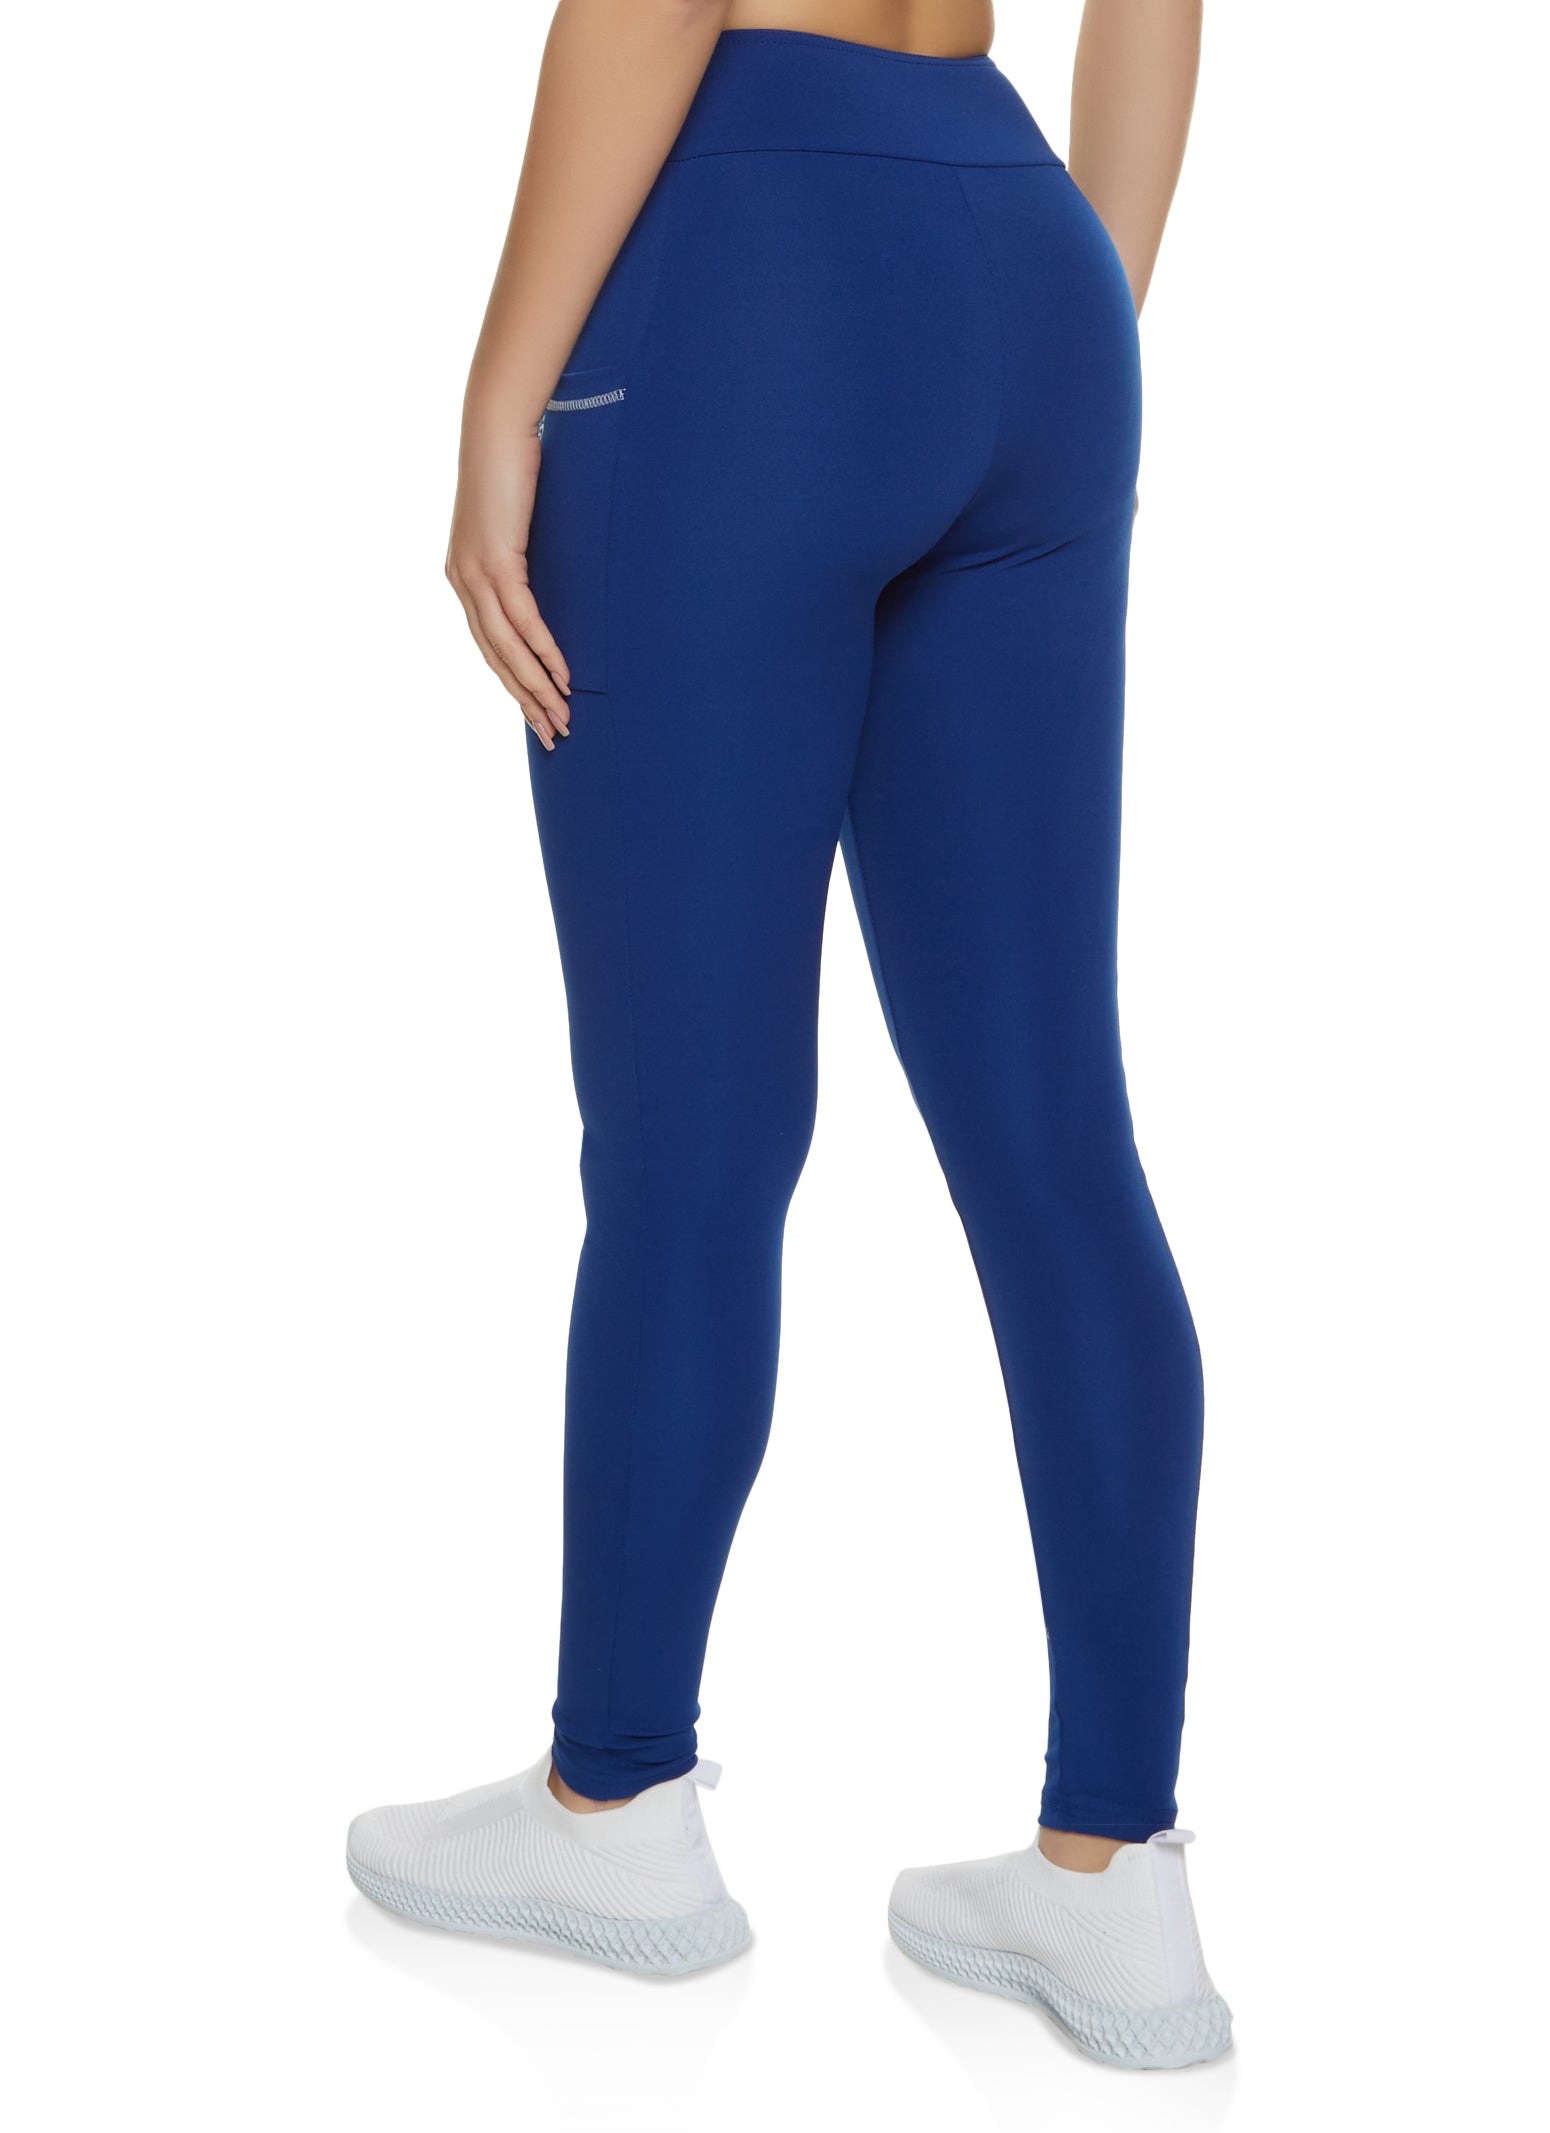 Contrast Stitch Cell Phone Pocket Leggings - Navy